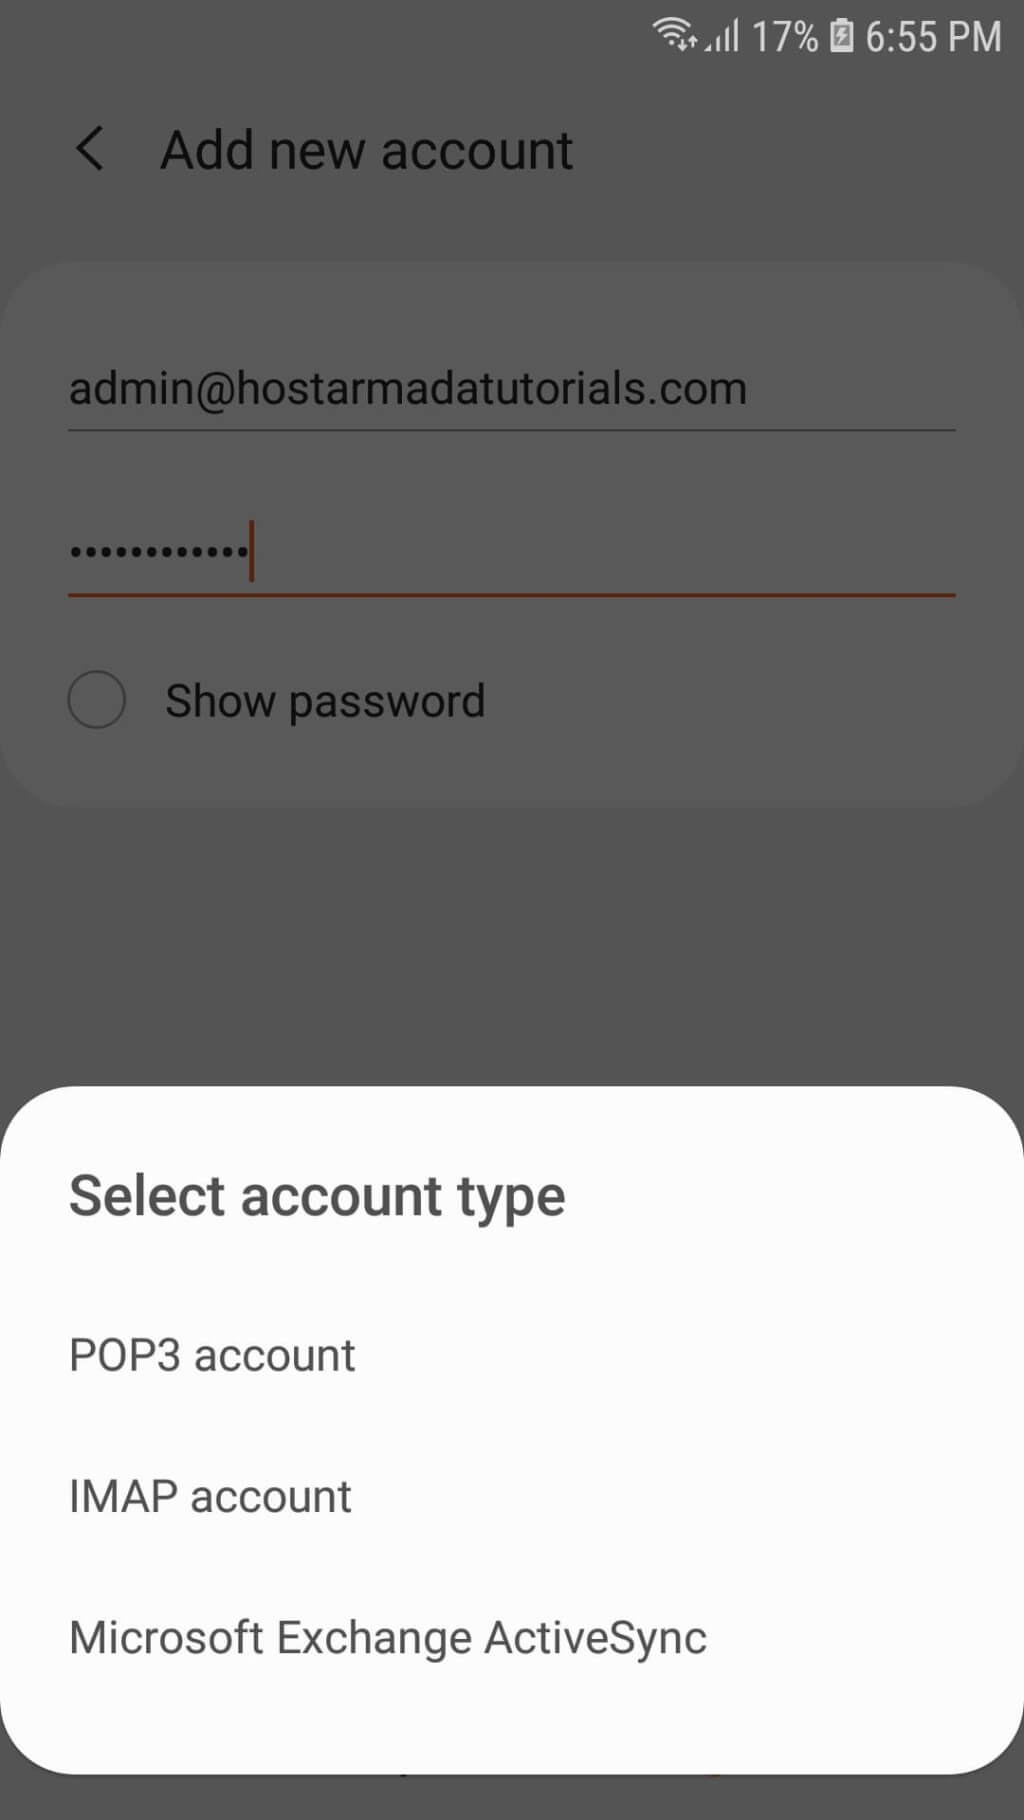 Selecting the account type